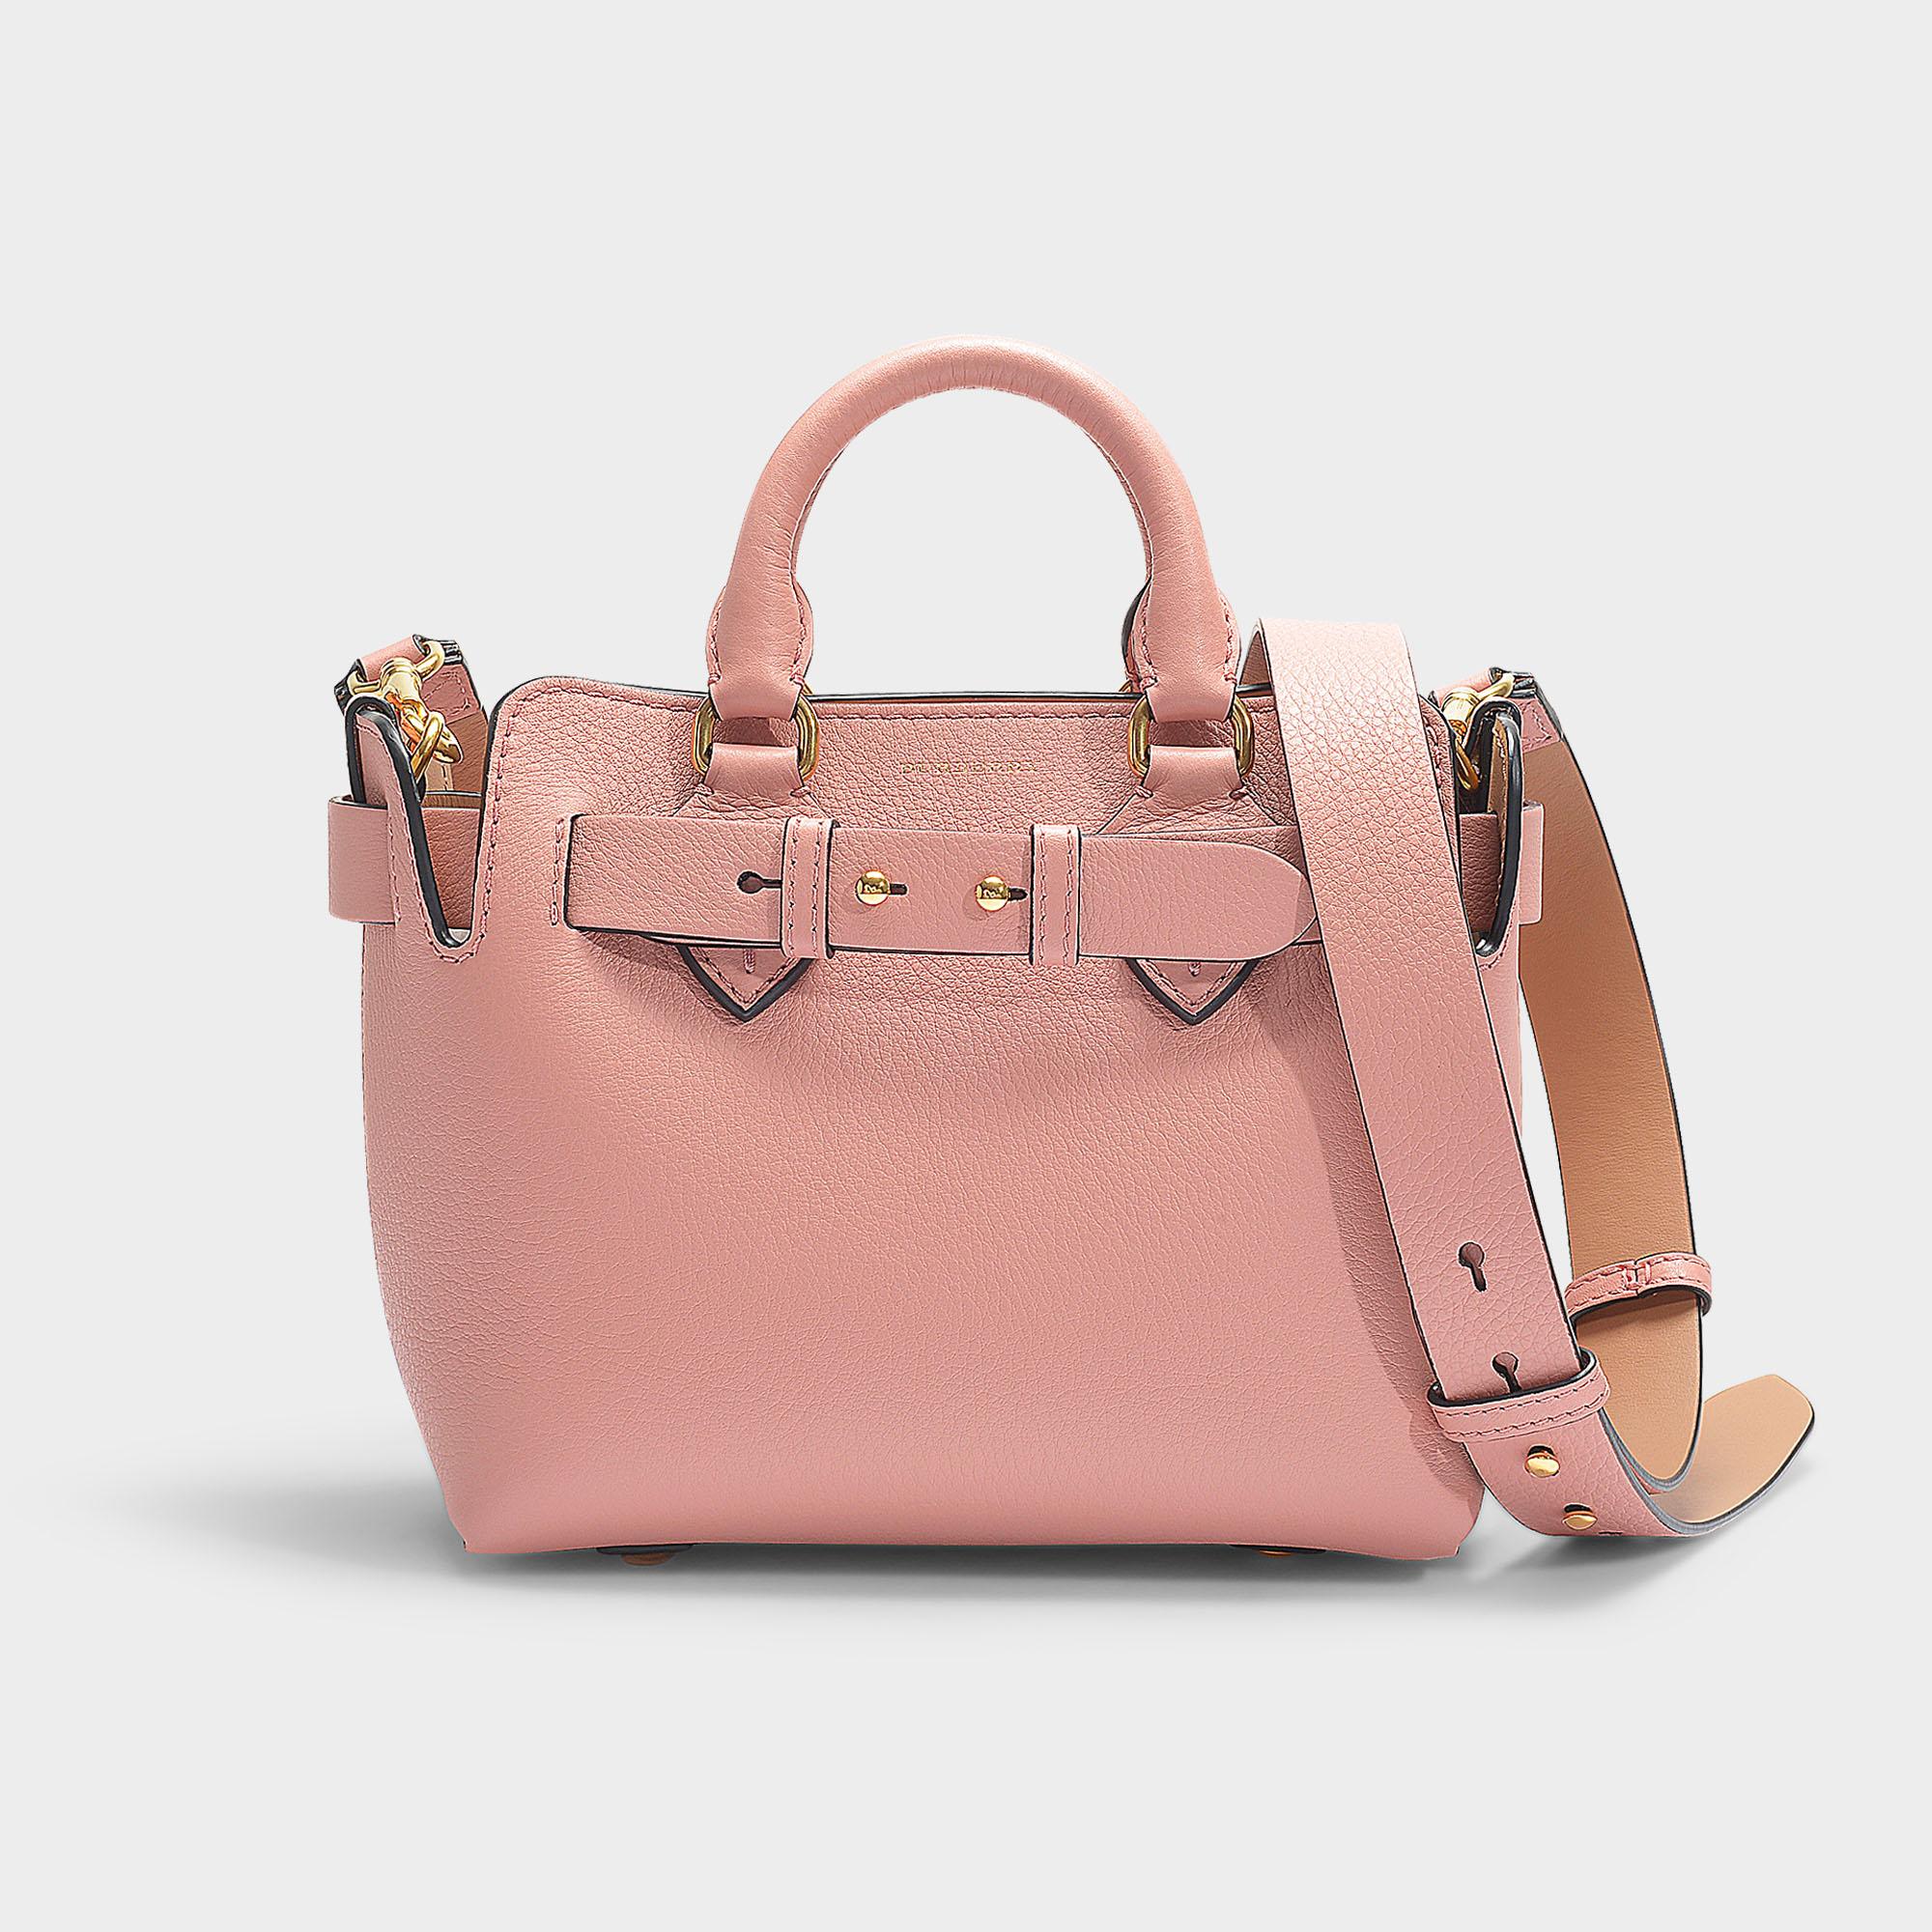 Burberry The Baby Belt Bag In Ash Rose Calfskin in Pink - Lyst